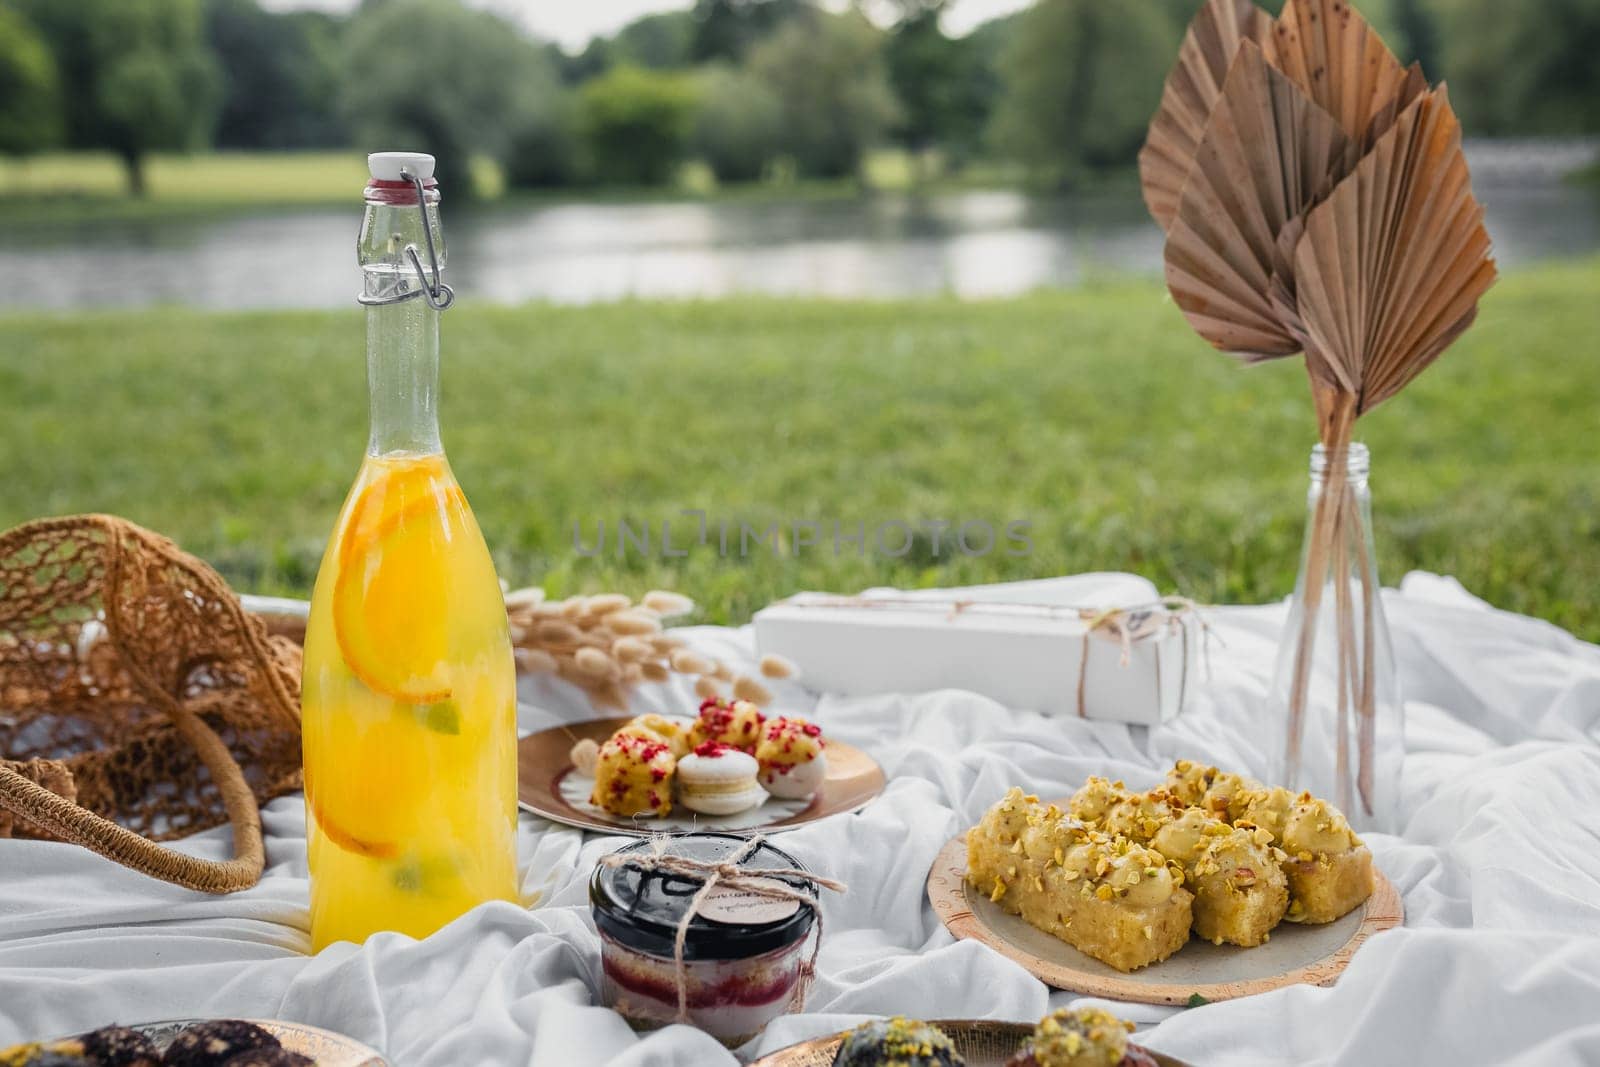 A Sumptuous Spread: Picnic Basket Brimming With Delicious Fare by Miron